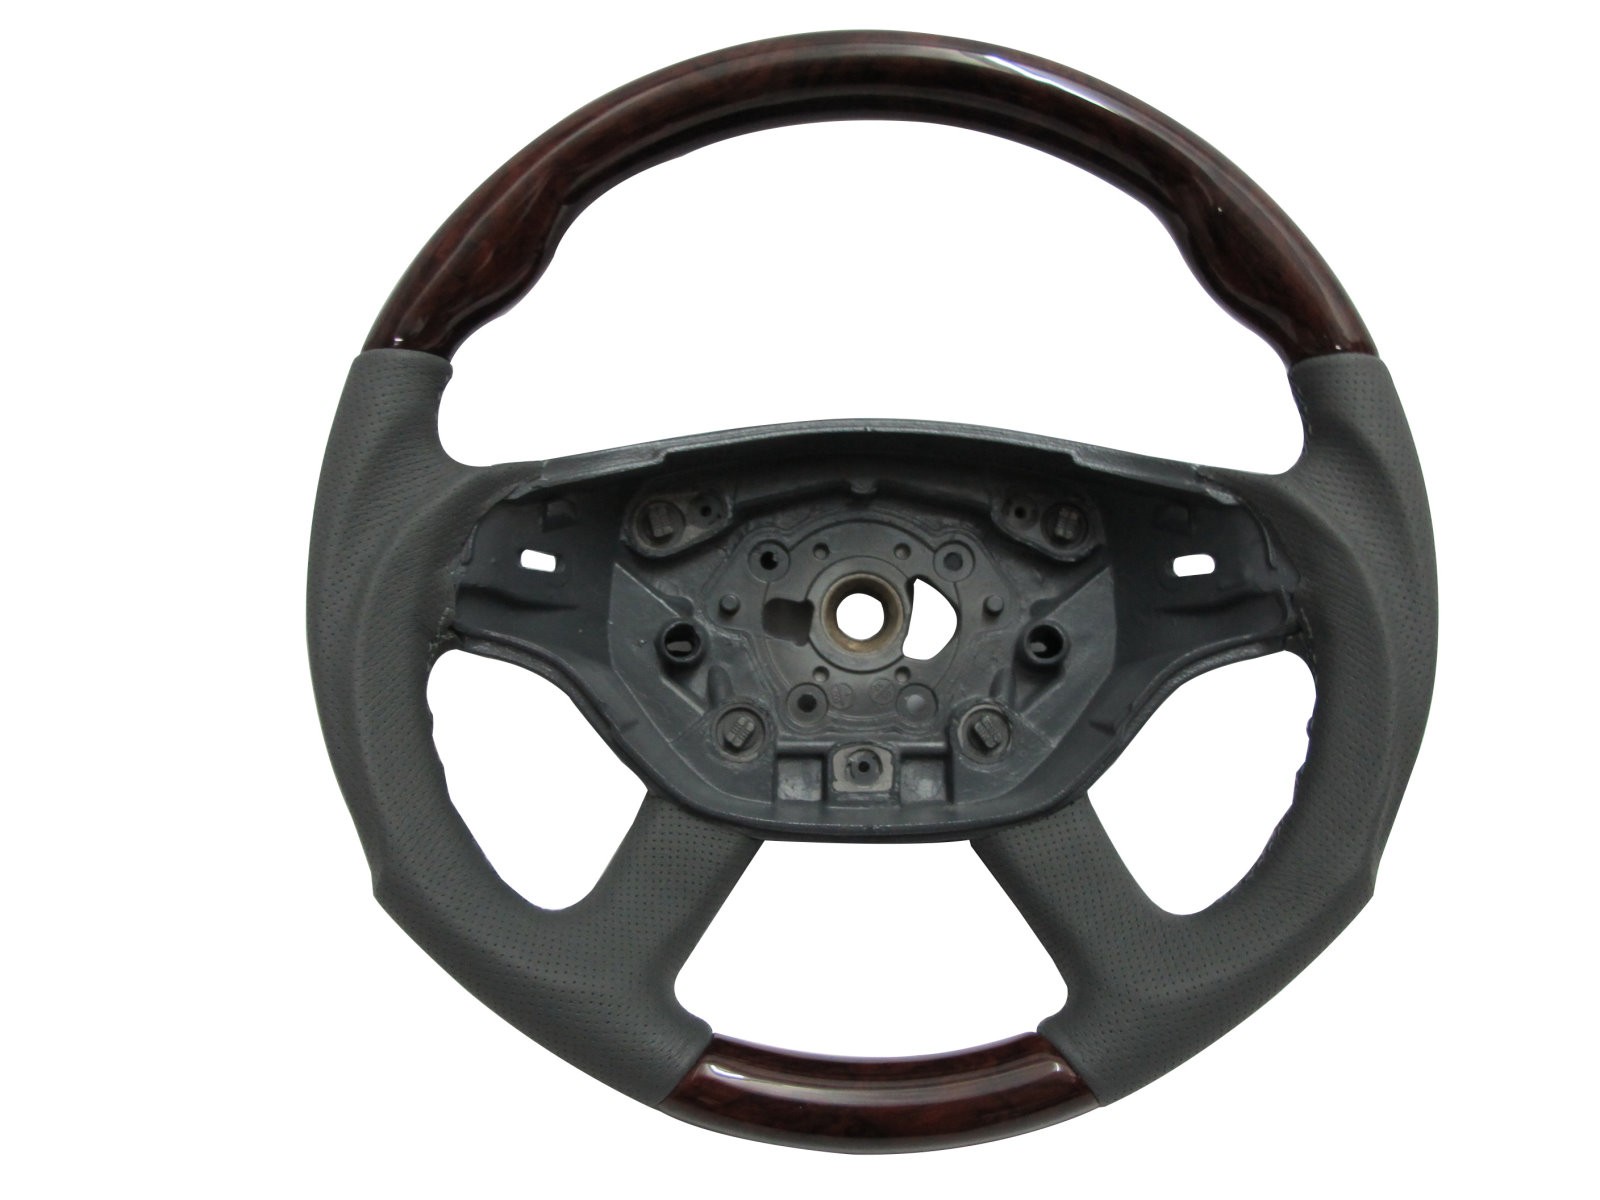 CrazyTheGod W221 2008-2009 FACELIFTED STEERING WHEEL SPORT Walnut WOOD GRAY Leather for Mercedes-Benz